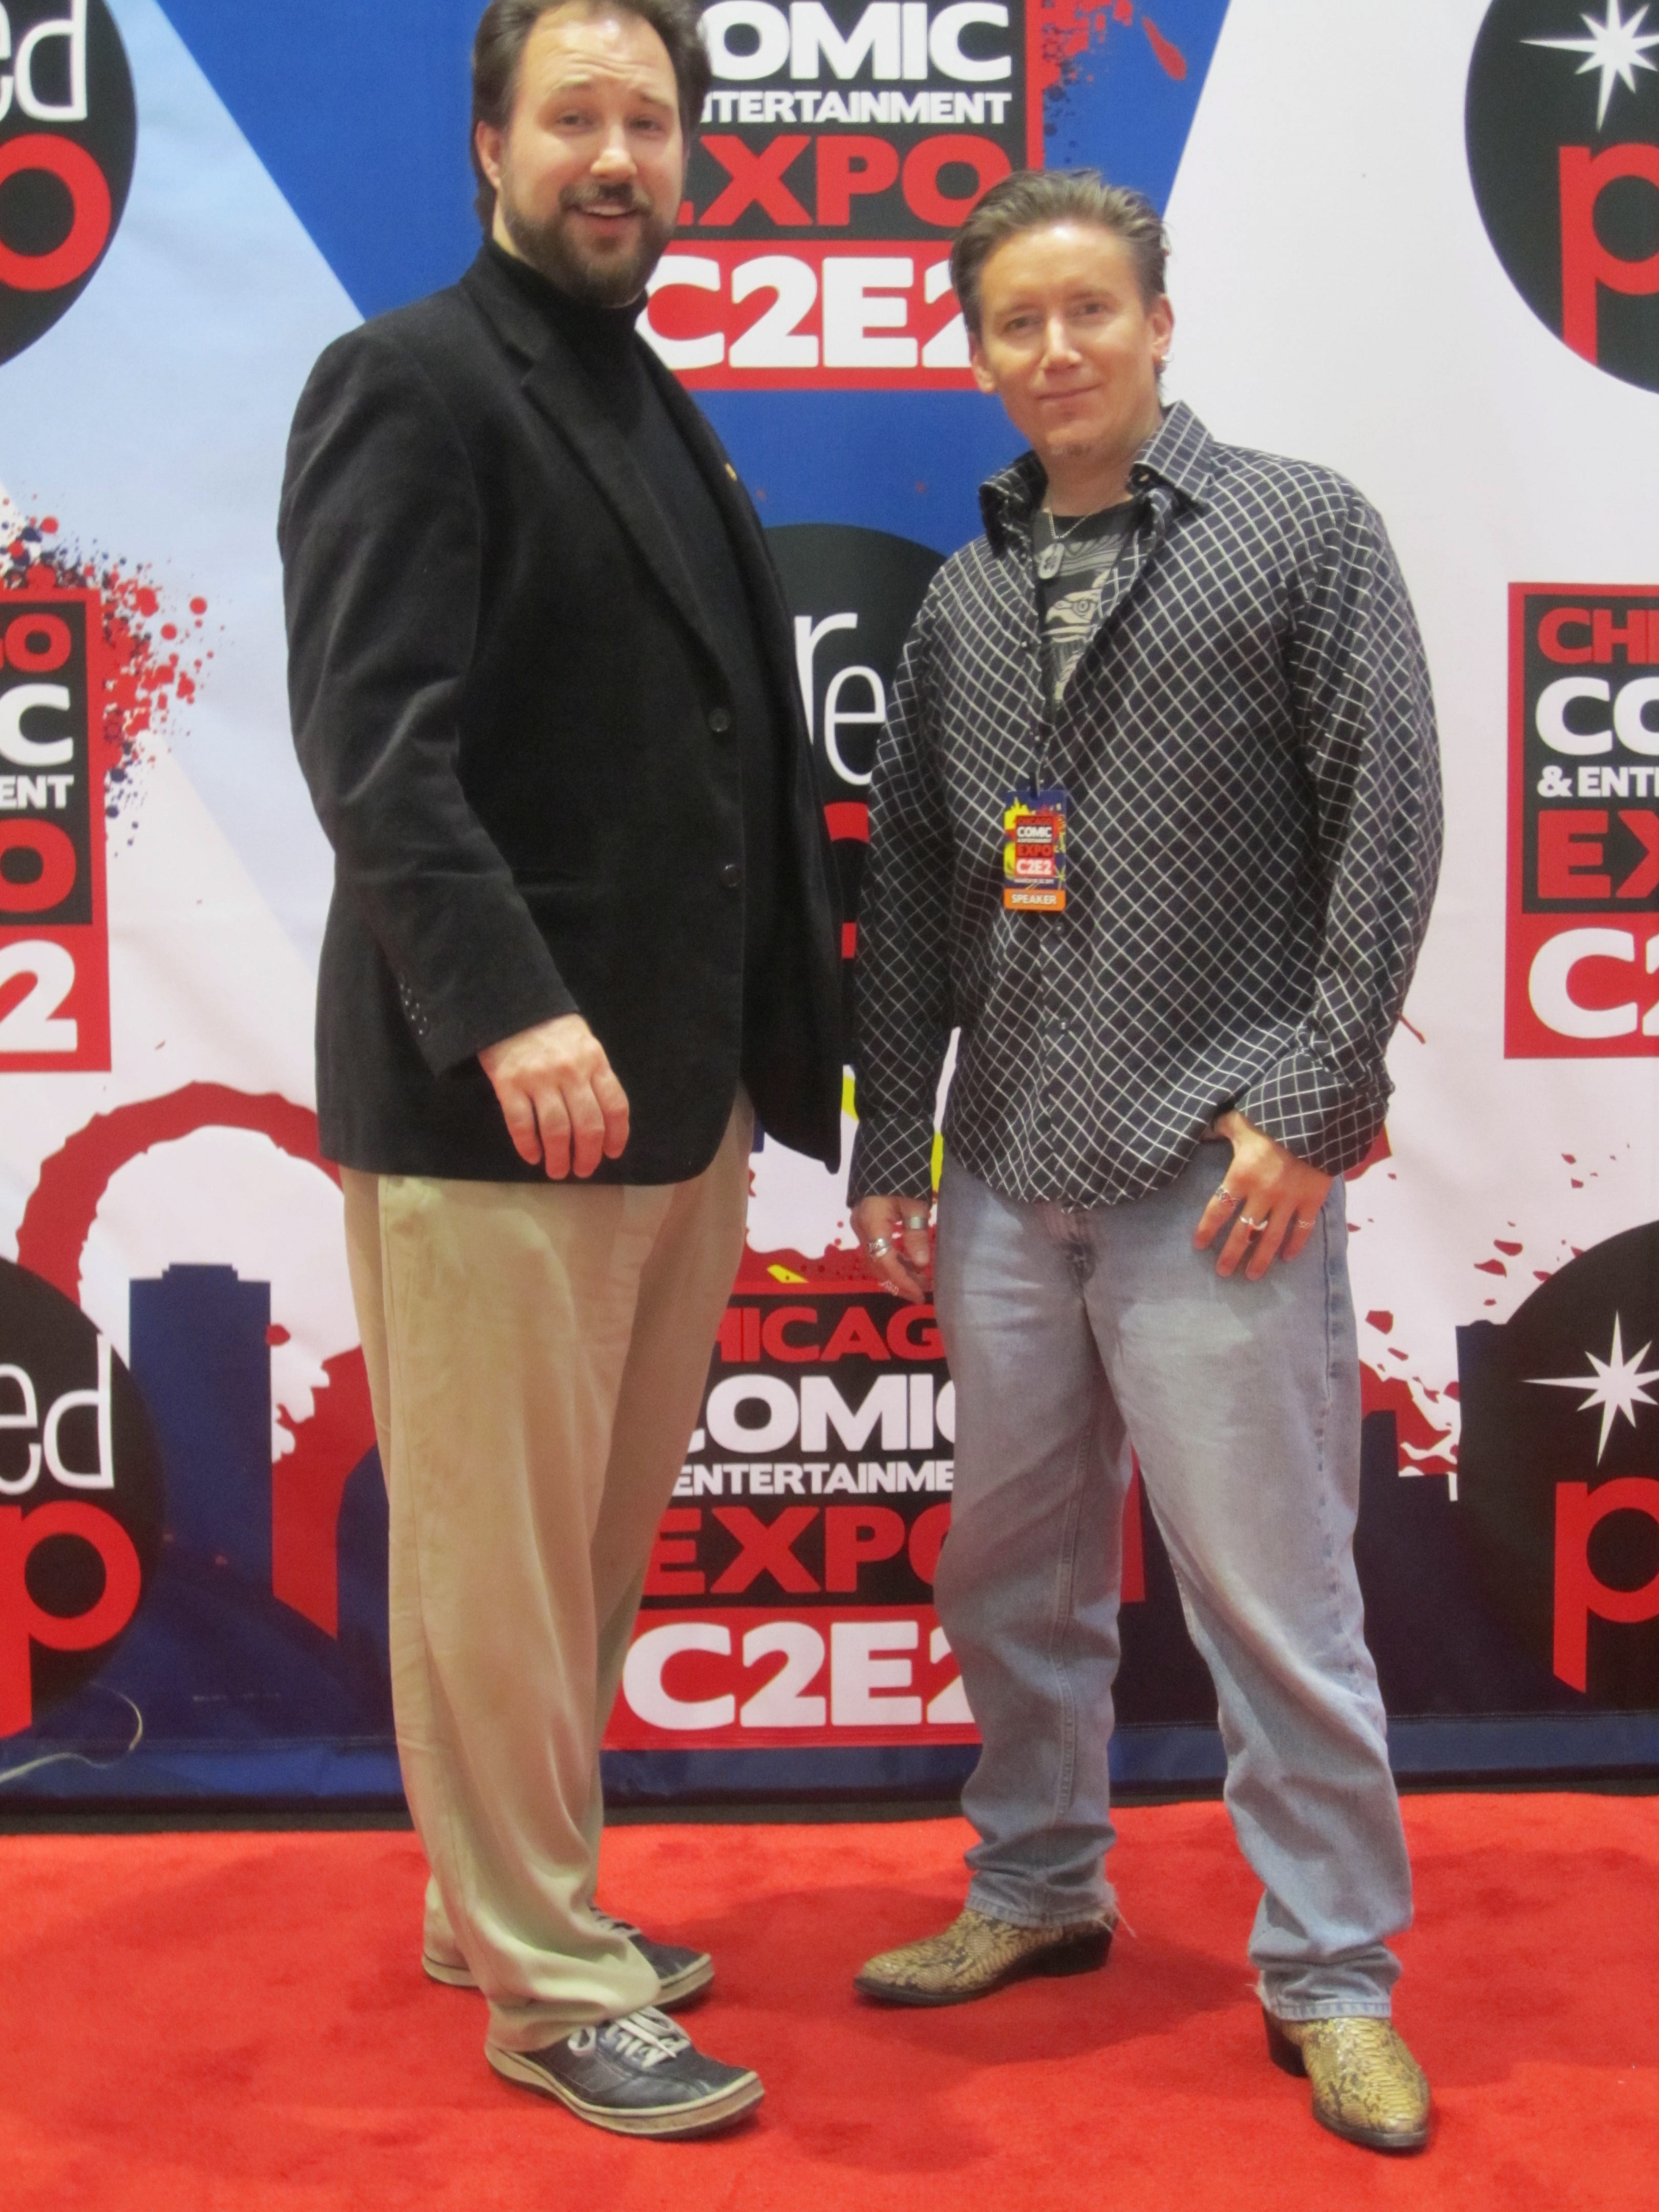 Appearing at C2E2 Expo